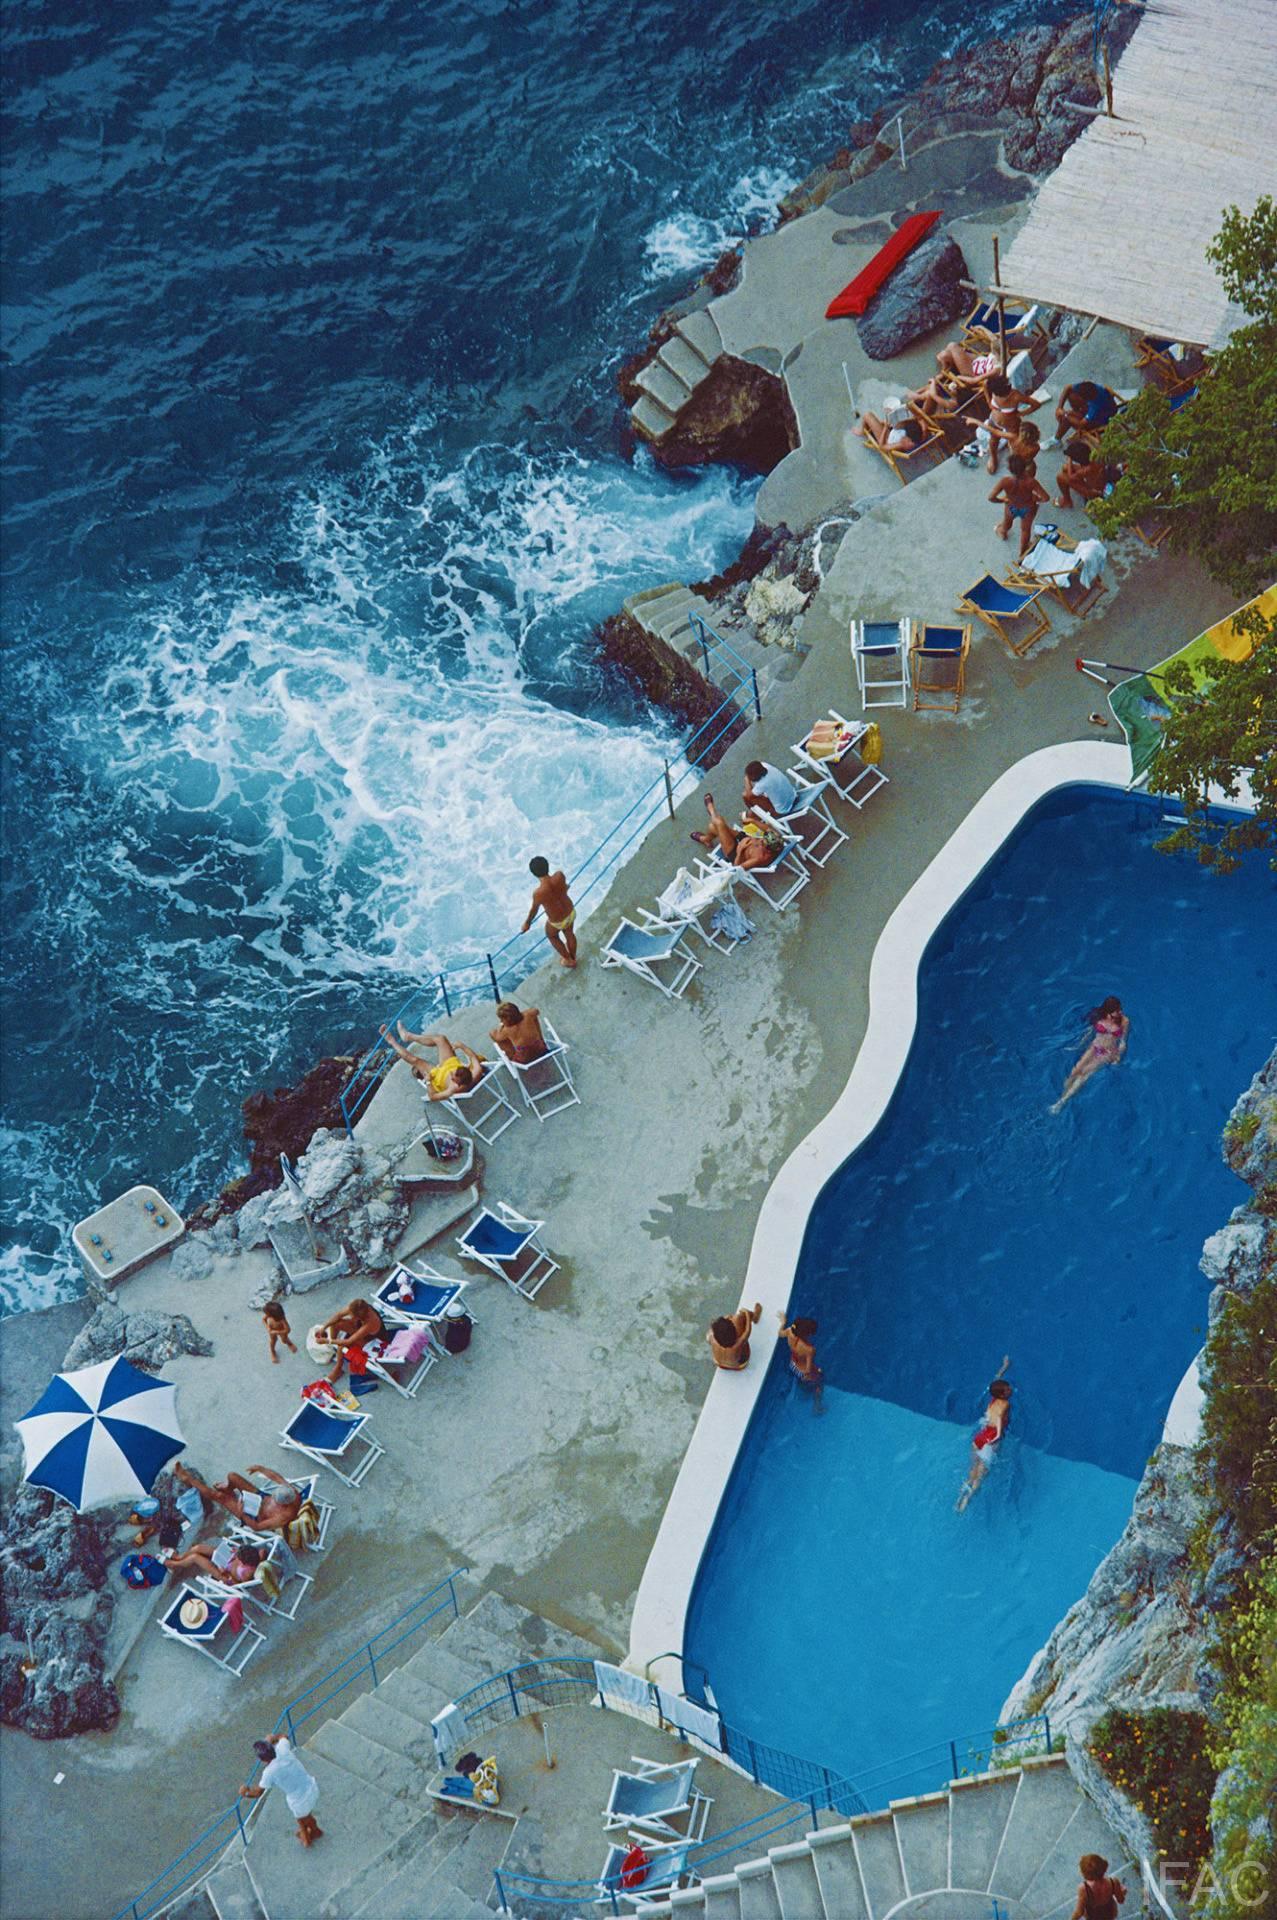 Slim Aarons
Pool On Amalfi Coast (Slim Aarons Estate Edition), 1984
Chromogenic lambda print
Estate stamped and numbered edition of 150
60 x 40 inches

A view of the seaside pool at the Hotel St. Caterina, Amalfi, Italy, September 1984.

Estate